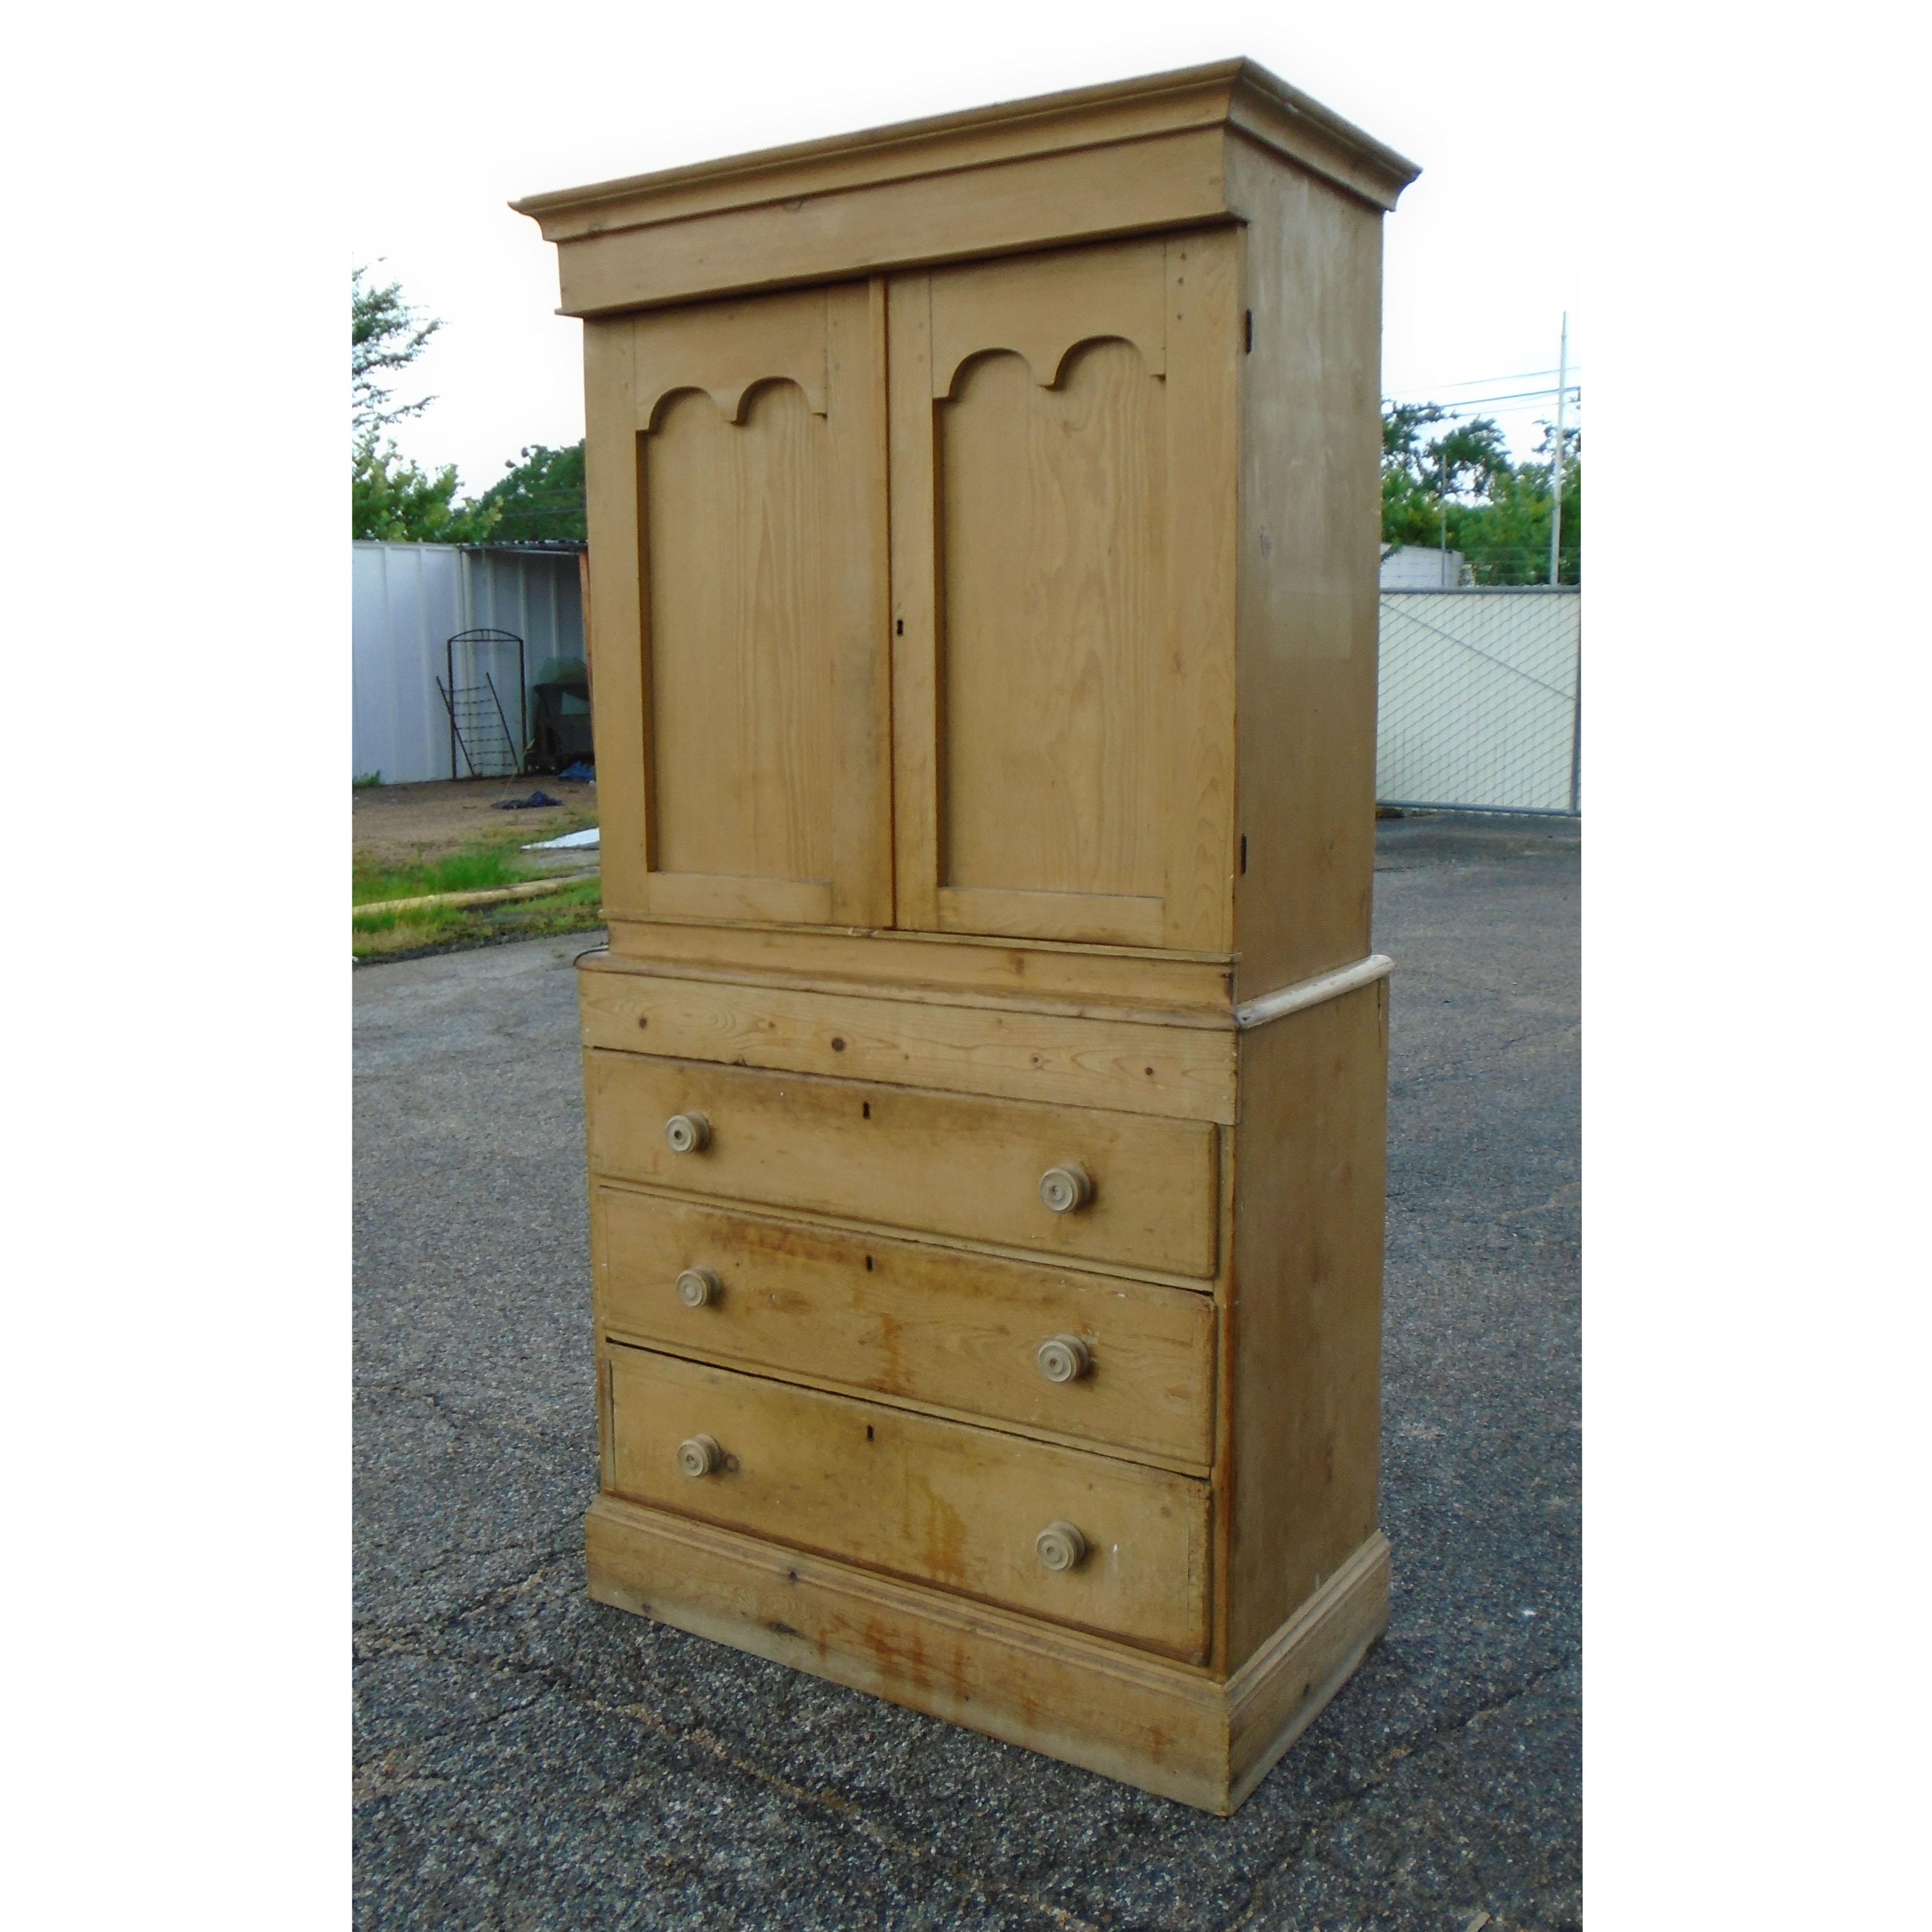 Rustic antique pine cupboard

Tall natural 2-piece rustic cupboard cabinet with top section opening to shelving 
with three drawers below. Pine pulls.

  